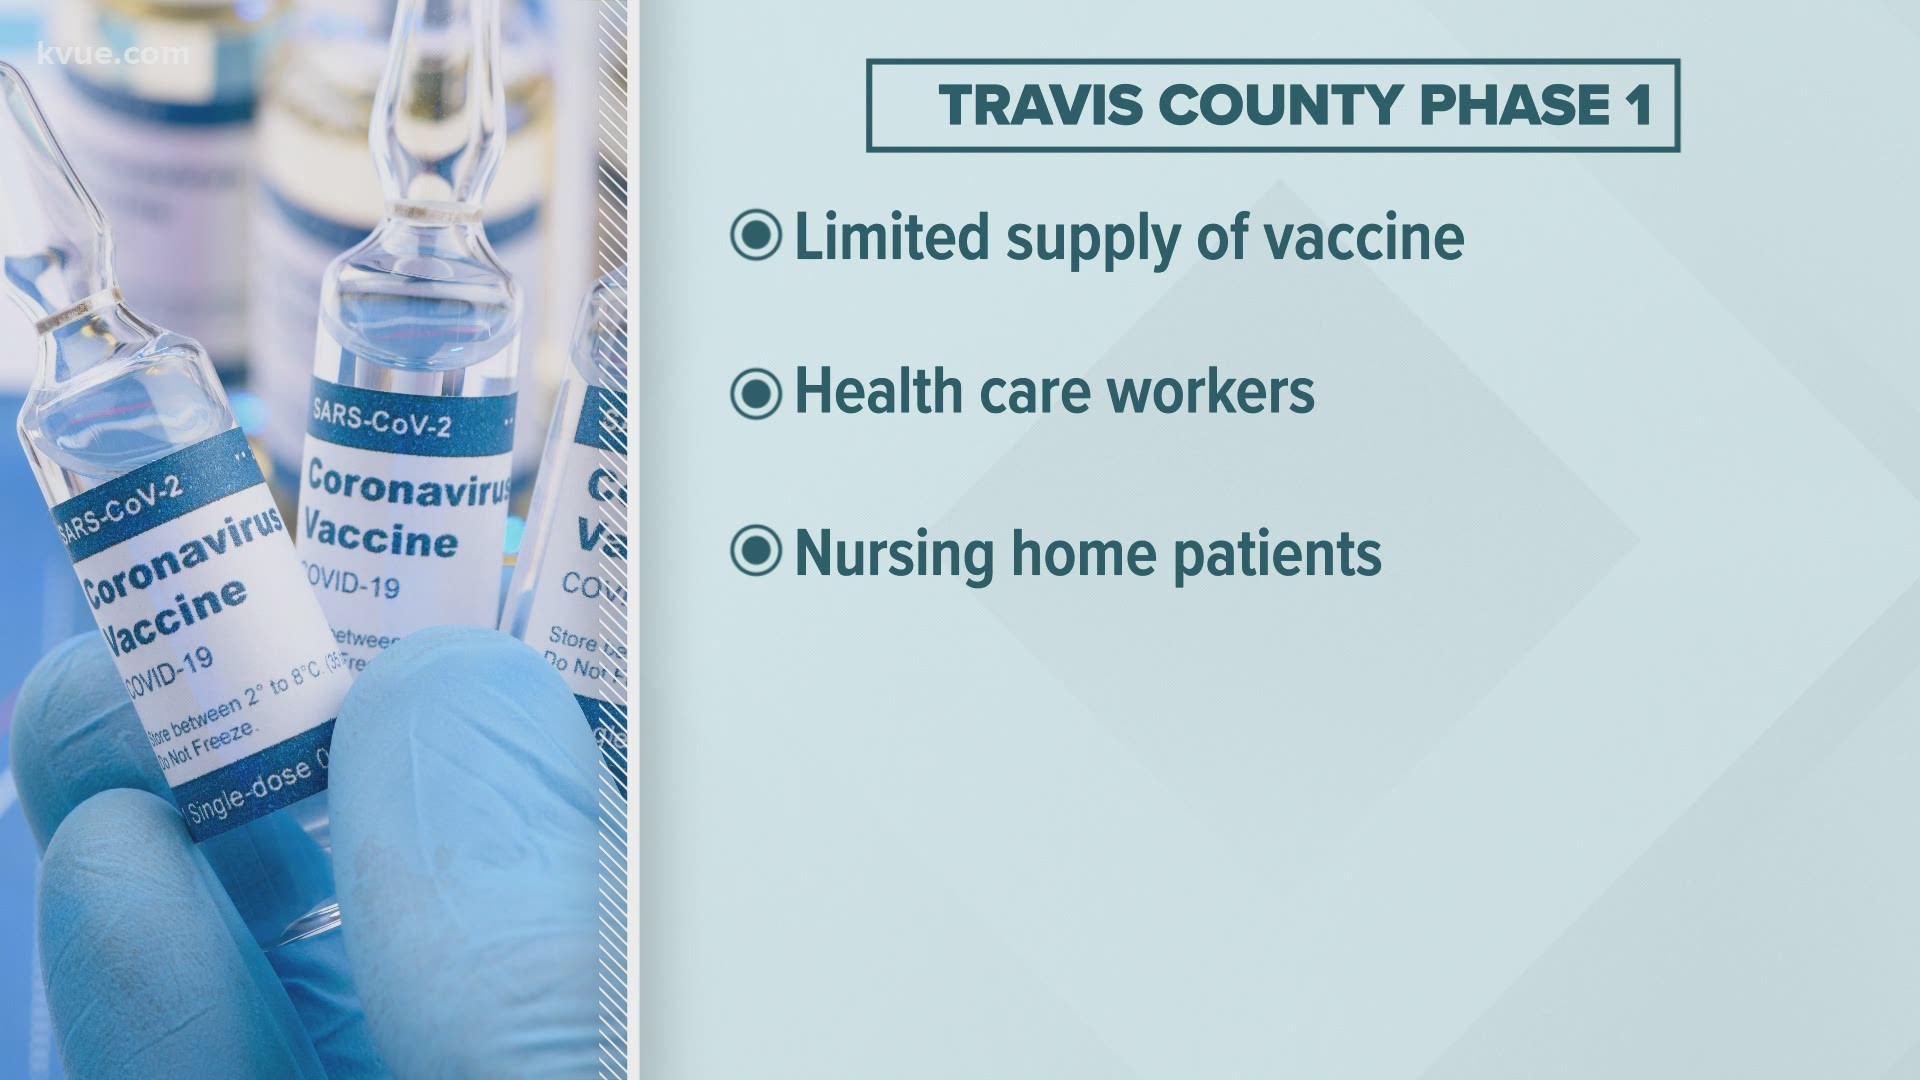 Doctors and health leaders in Travis County are getting ready to roll out the first round of COVID-19 vaccines. They are expected to be released in mid-December.